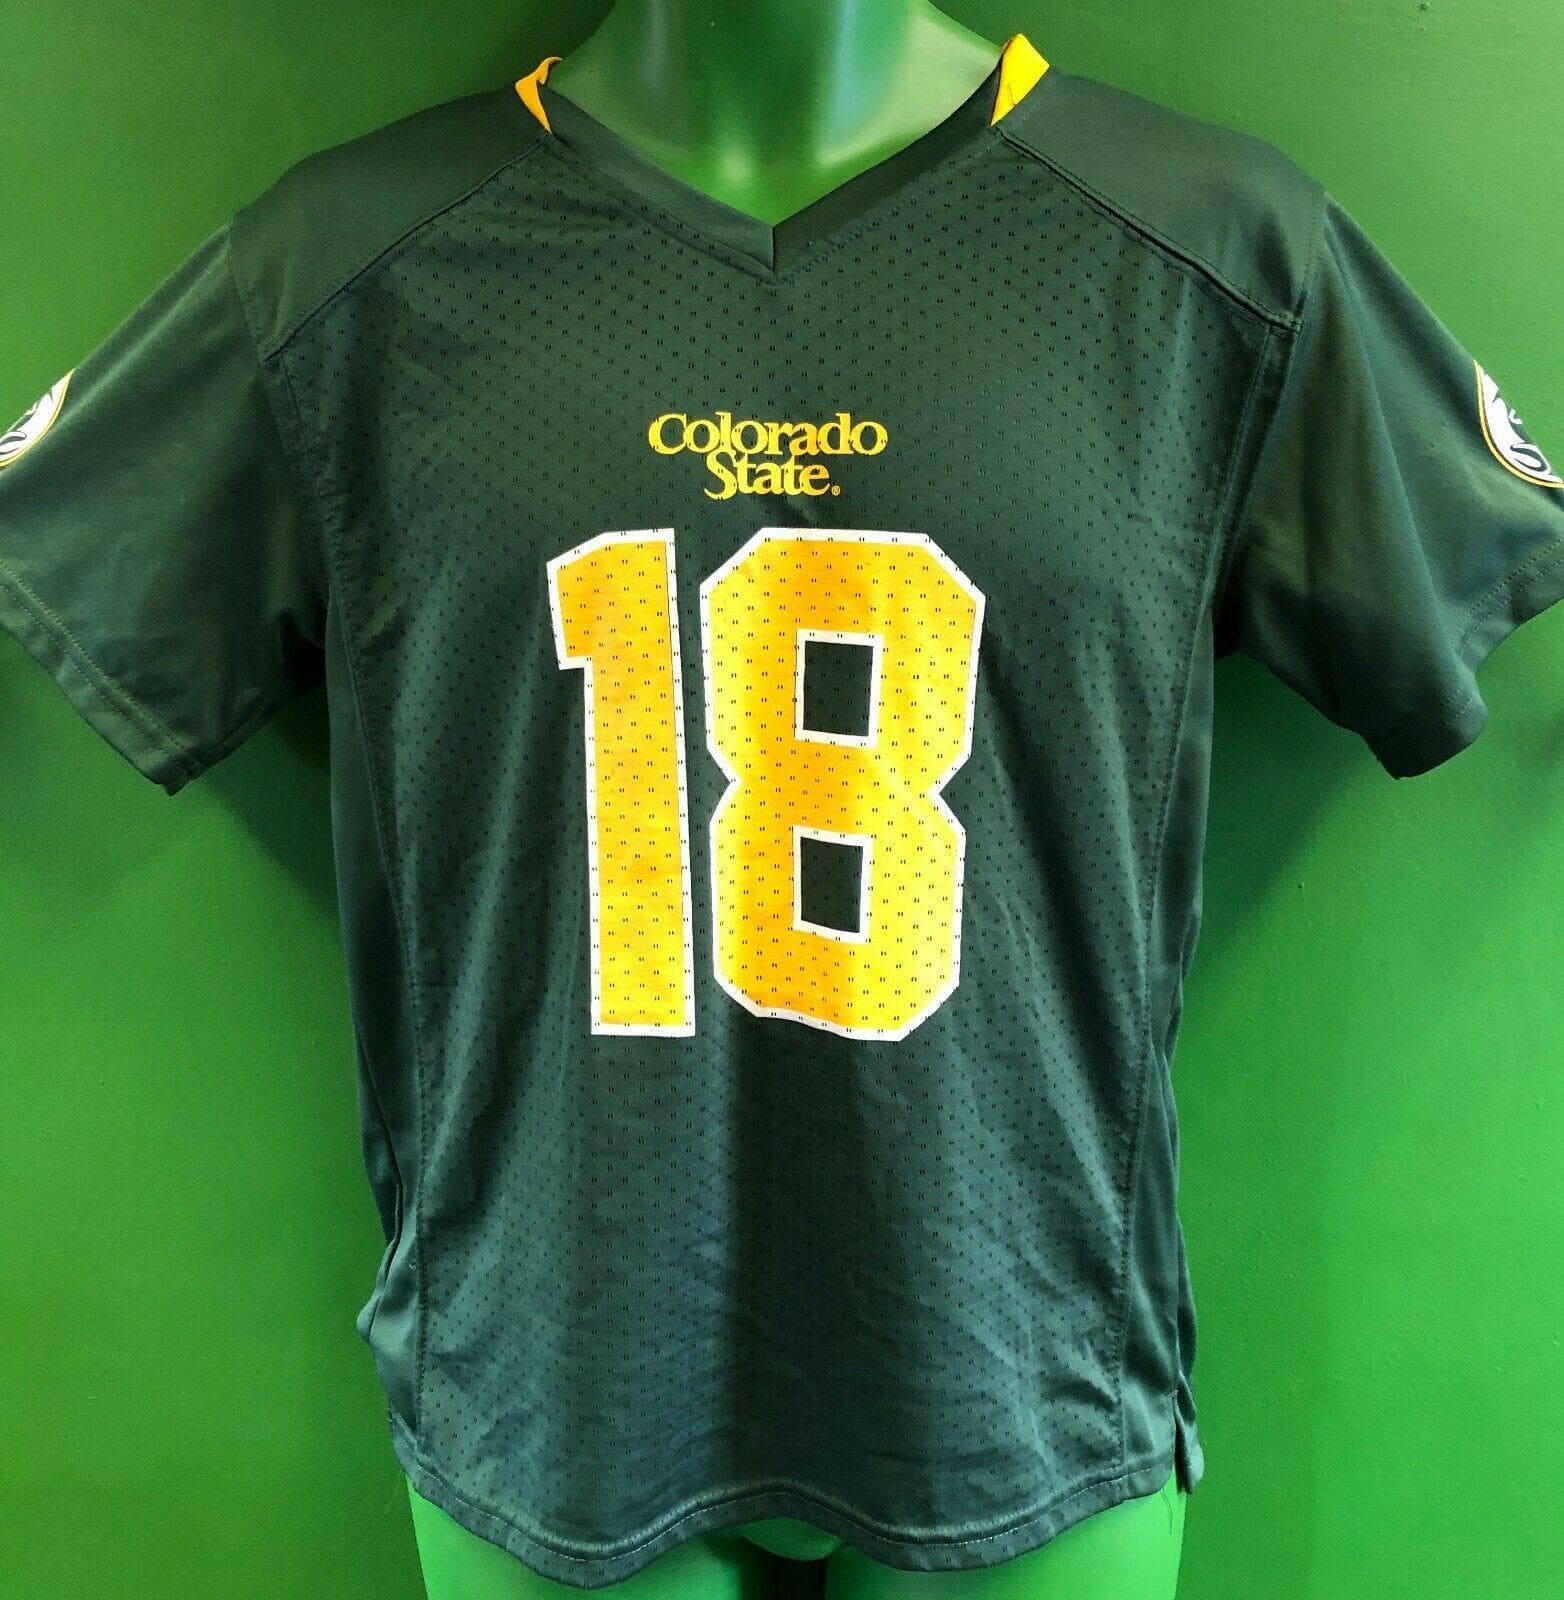 NCAA Colorado State Rams #18 Jersey Youth Large 12-14